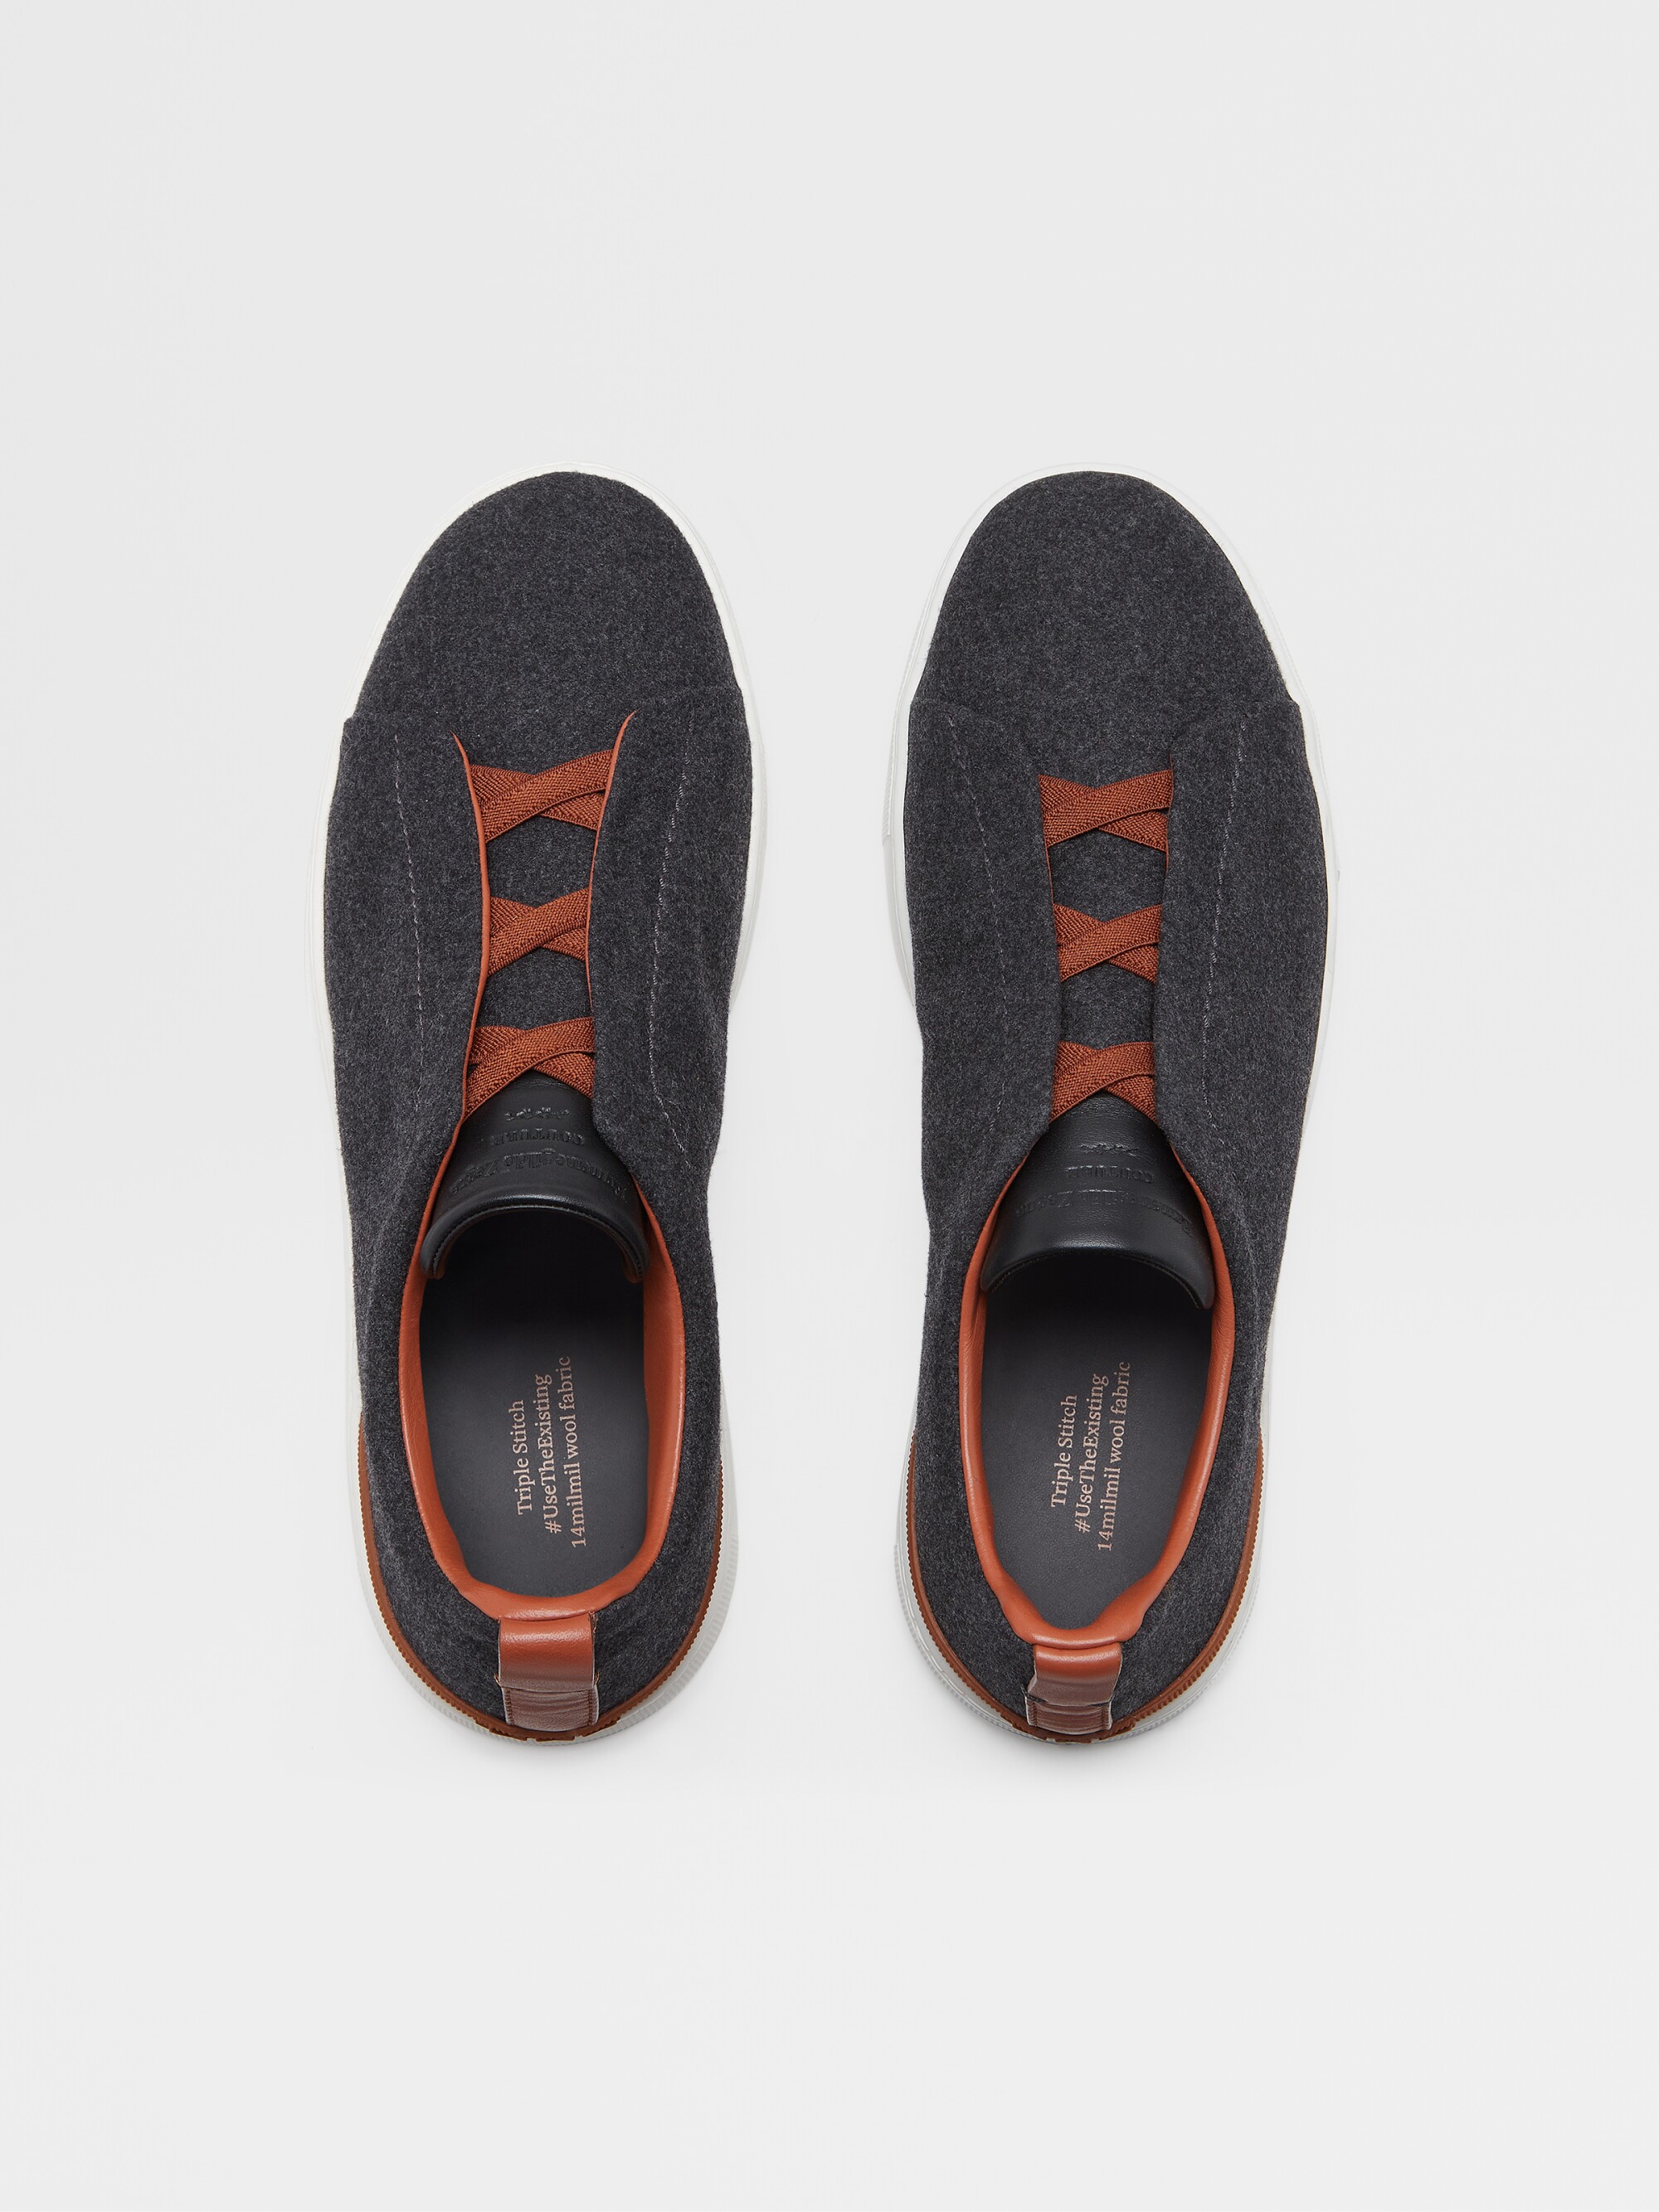 Zegna dark gray sneakers with laces and orange details